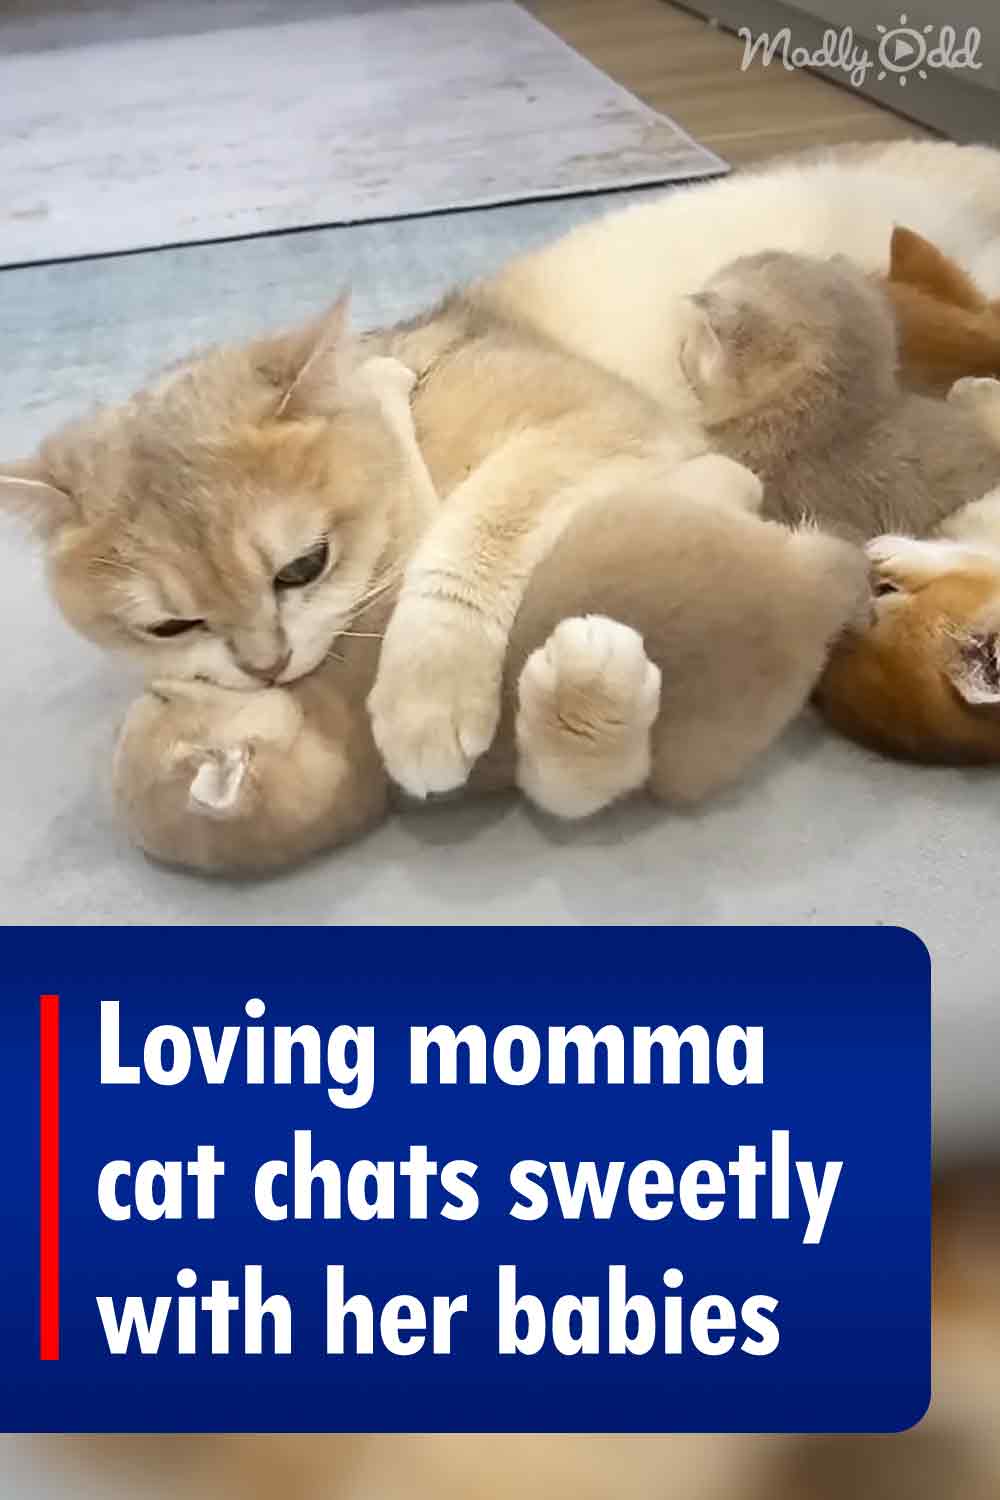 Loving momma cat chats sweetly with her babies